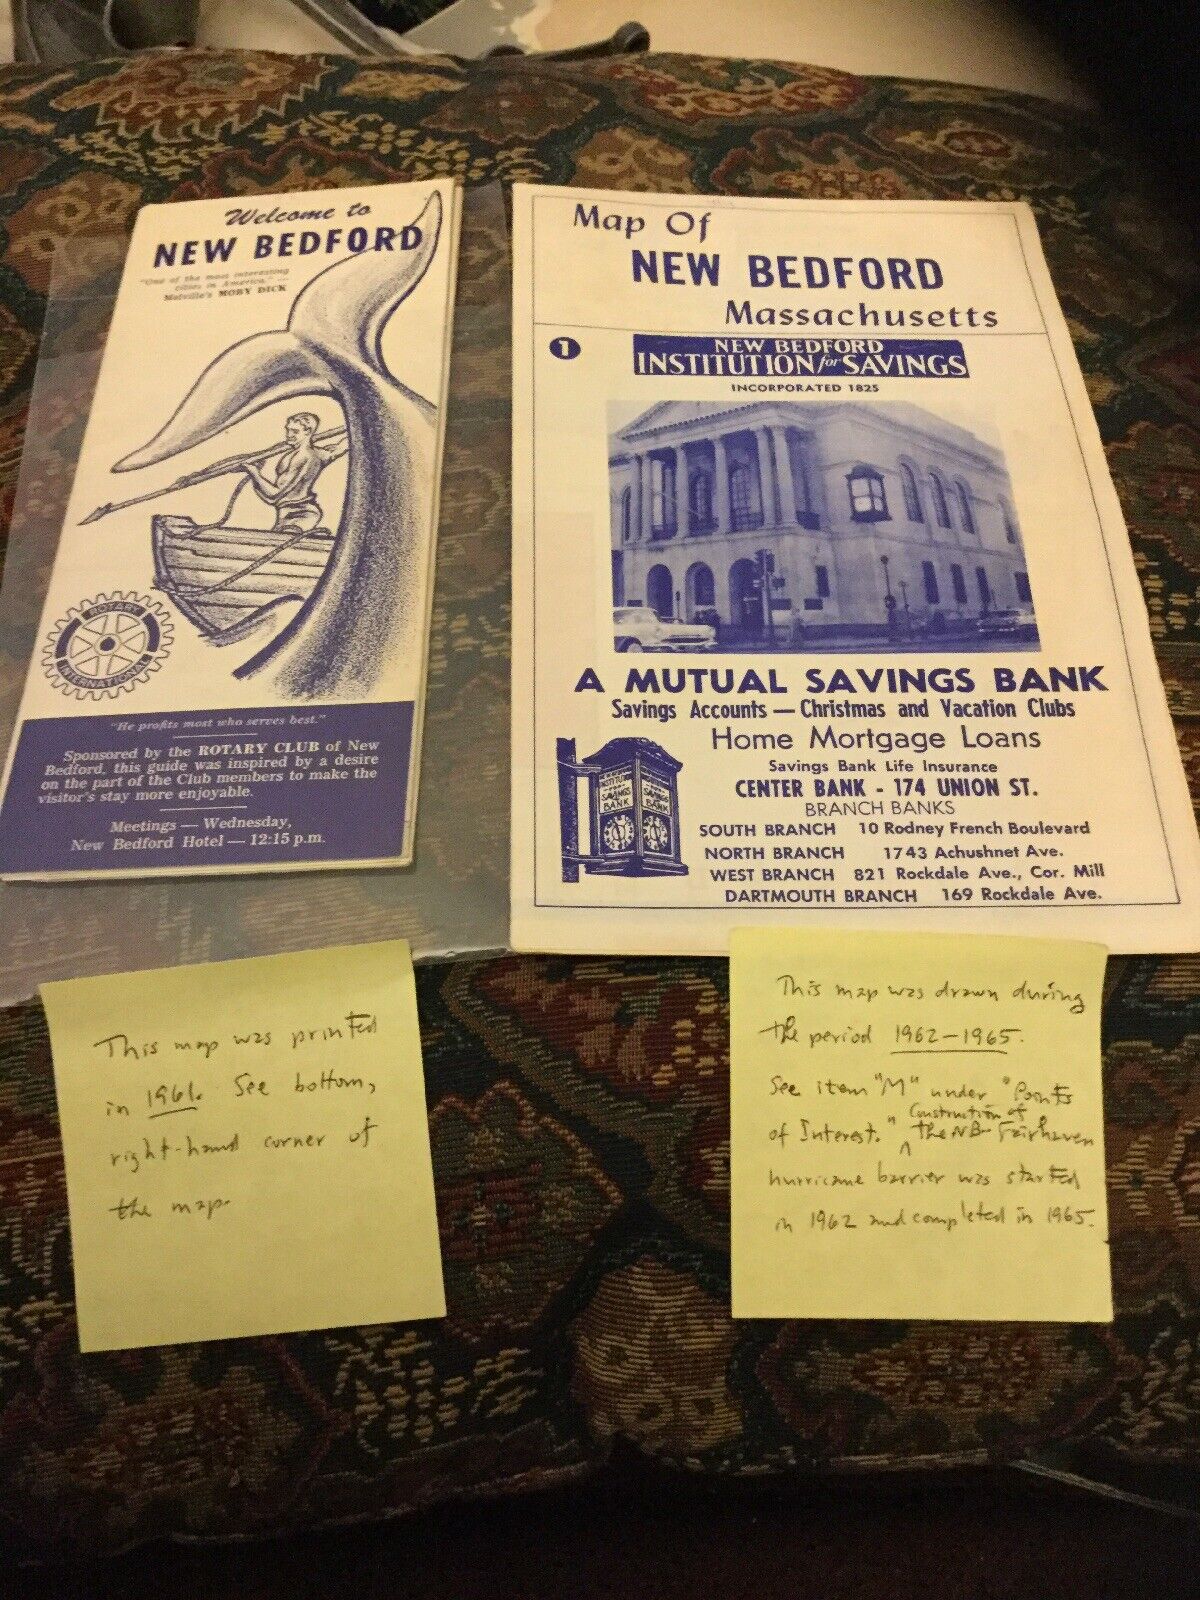 2 Vintage New Bedford Maps 1961 And 1962-1965